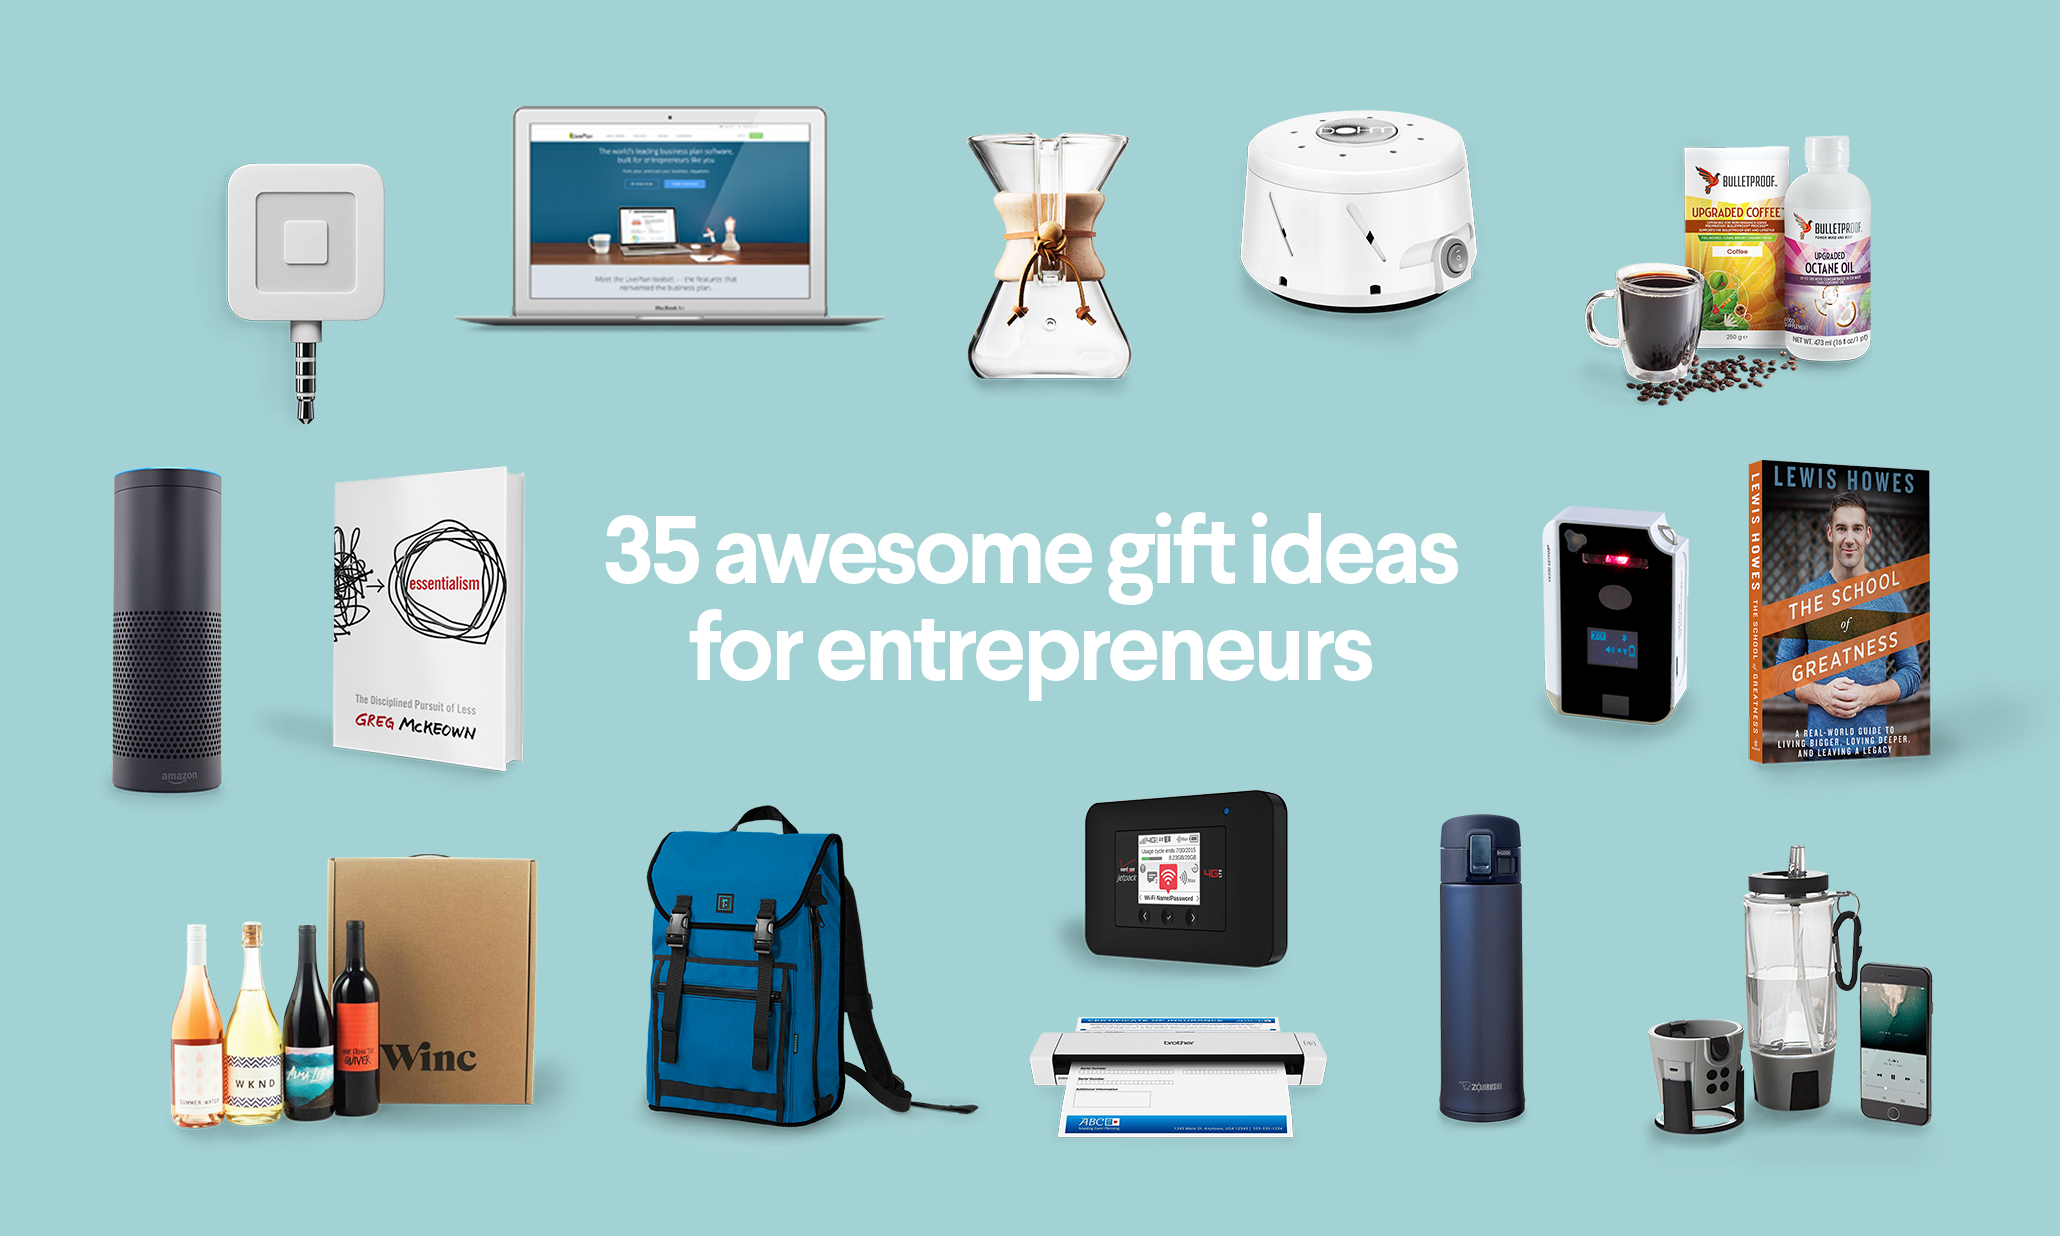 43 Thoughtful and Appropriate Corporate Gifts to Give in 2023